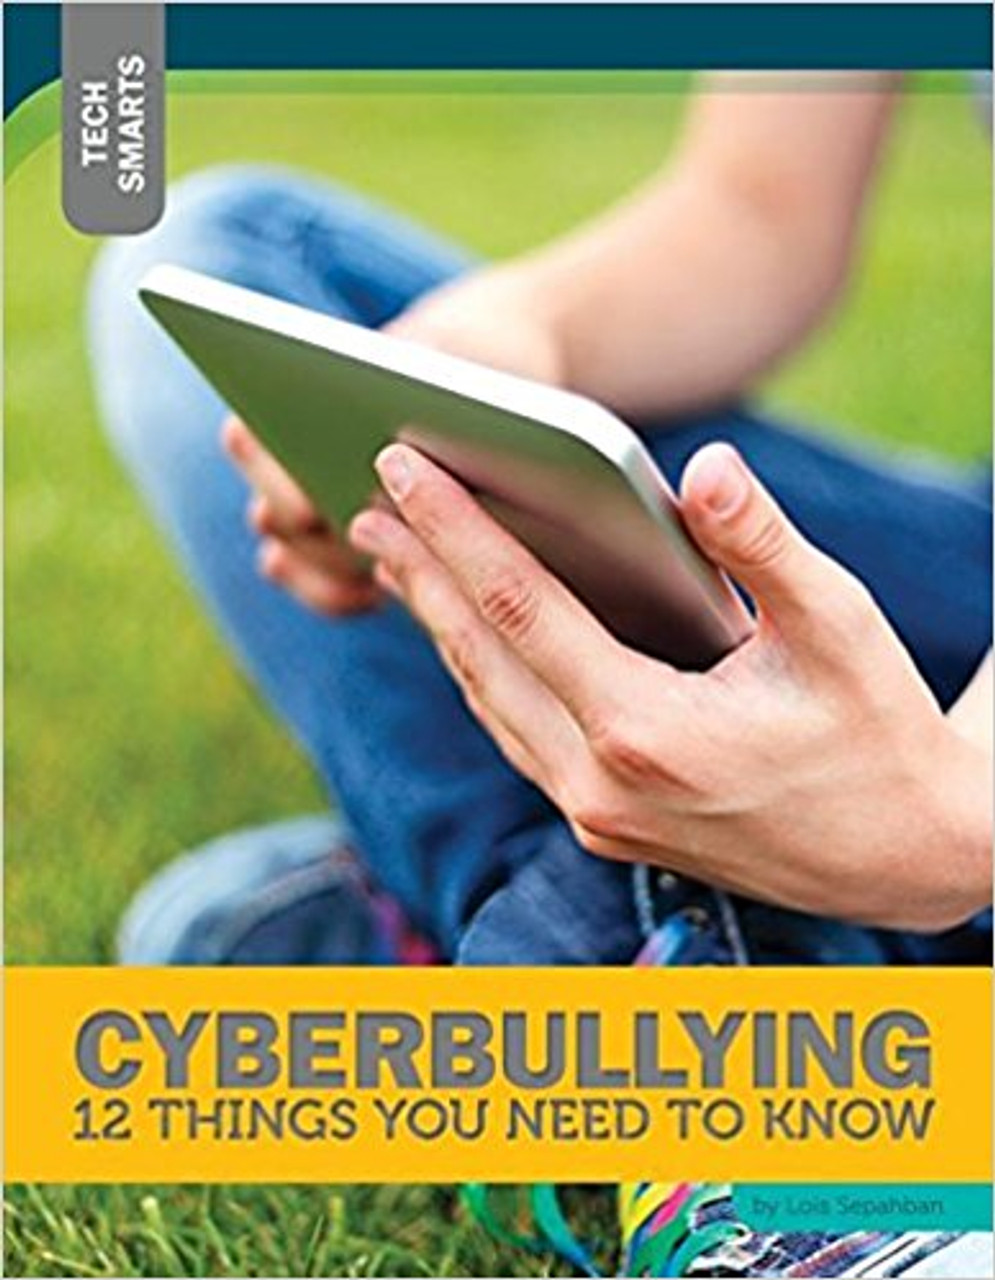 Cyberbullying: 12 Things You Need to Know by Lois Sepahban